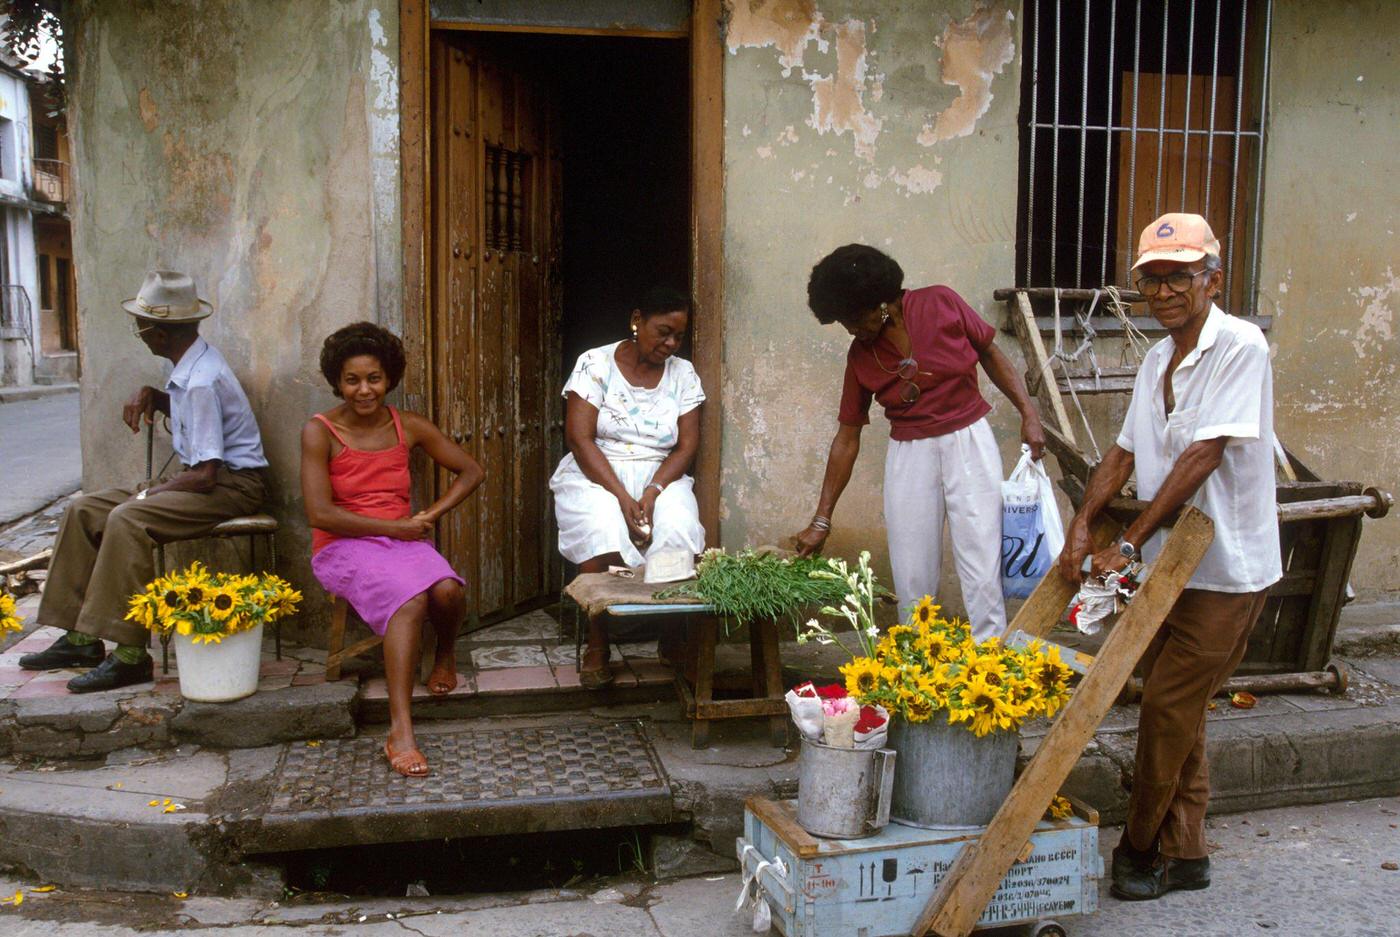 Cuban people selling flowers at the entrance of their house, Cuba, 1990.